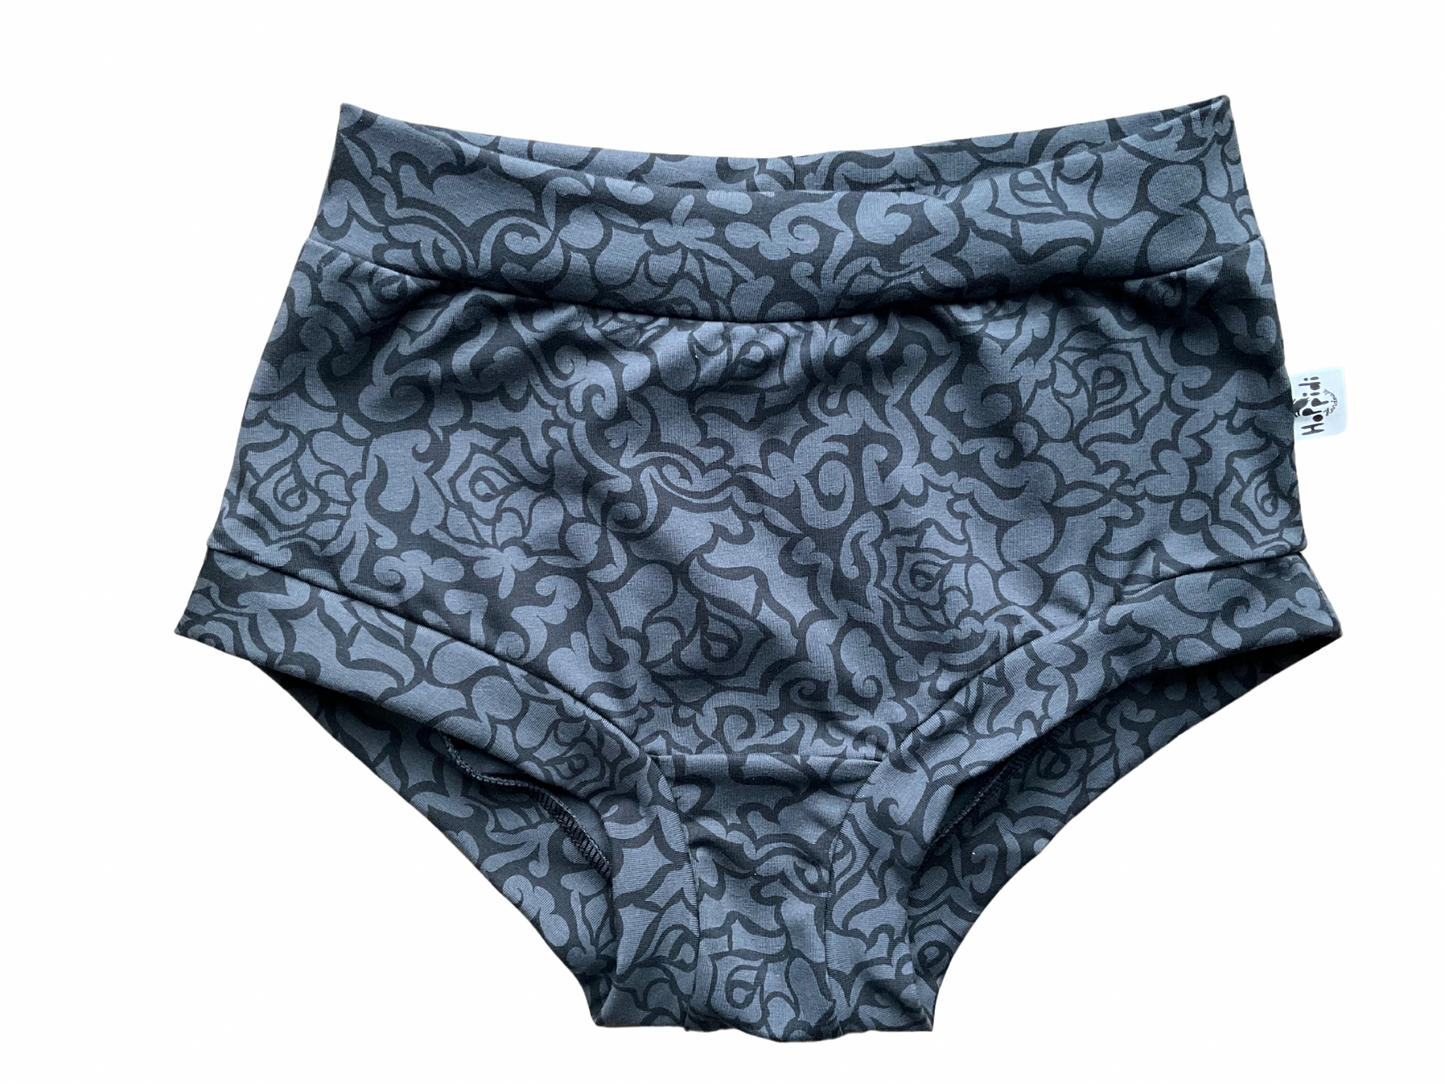 Anthracite High rise women’s knickers with black roses print